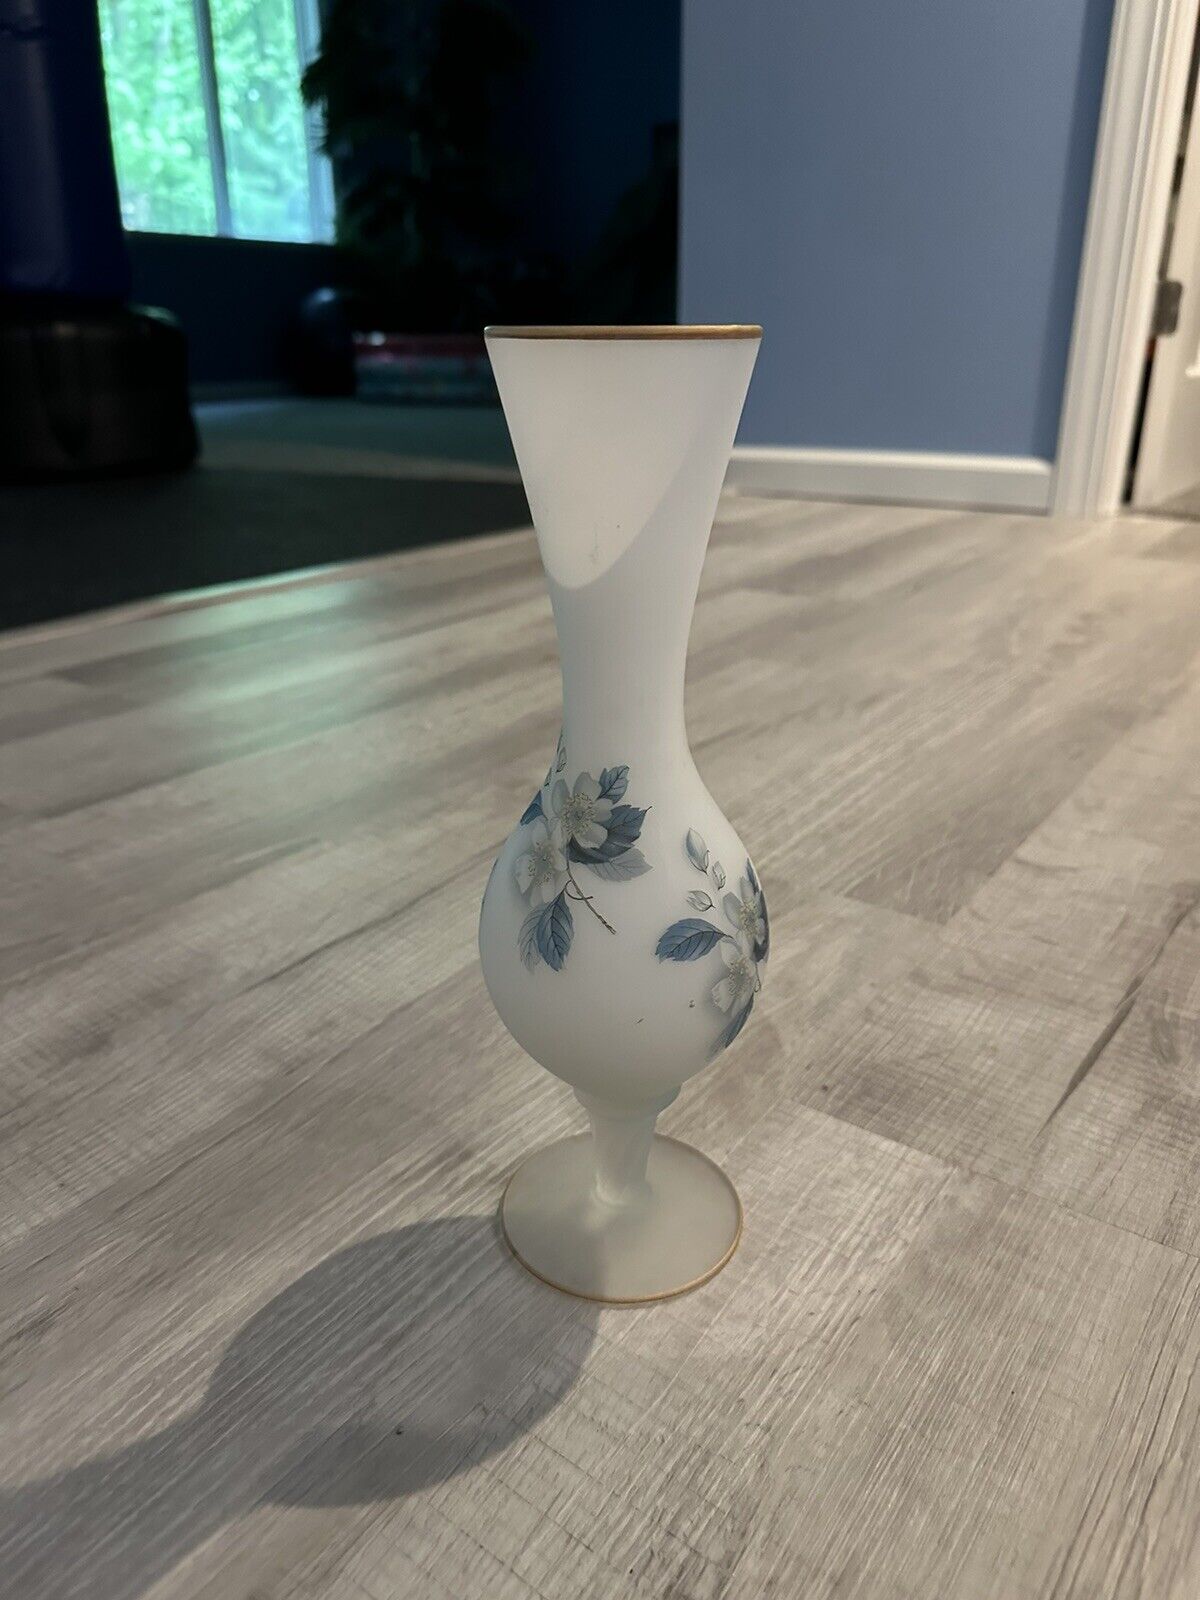 Vintage Norleans Footed White Satin Frosted Glass Vase w/ Floral Pattern